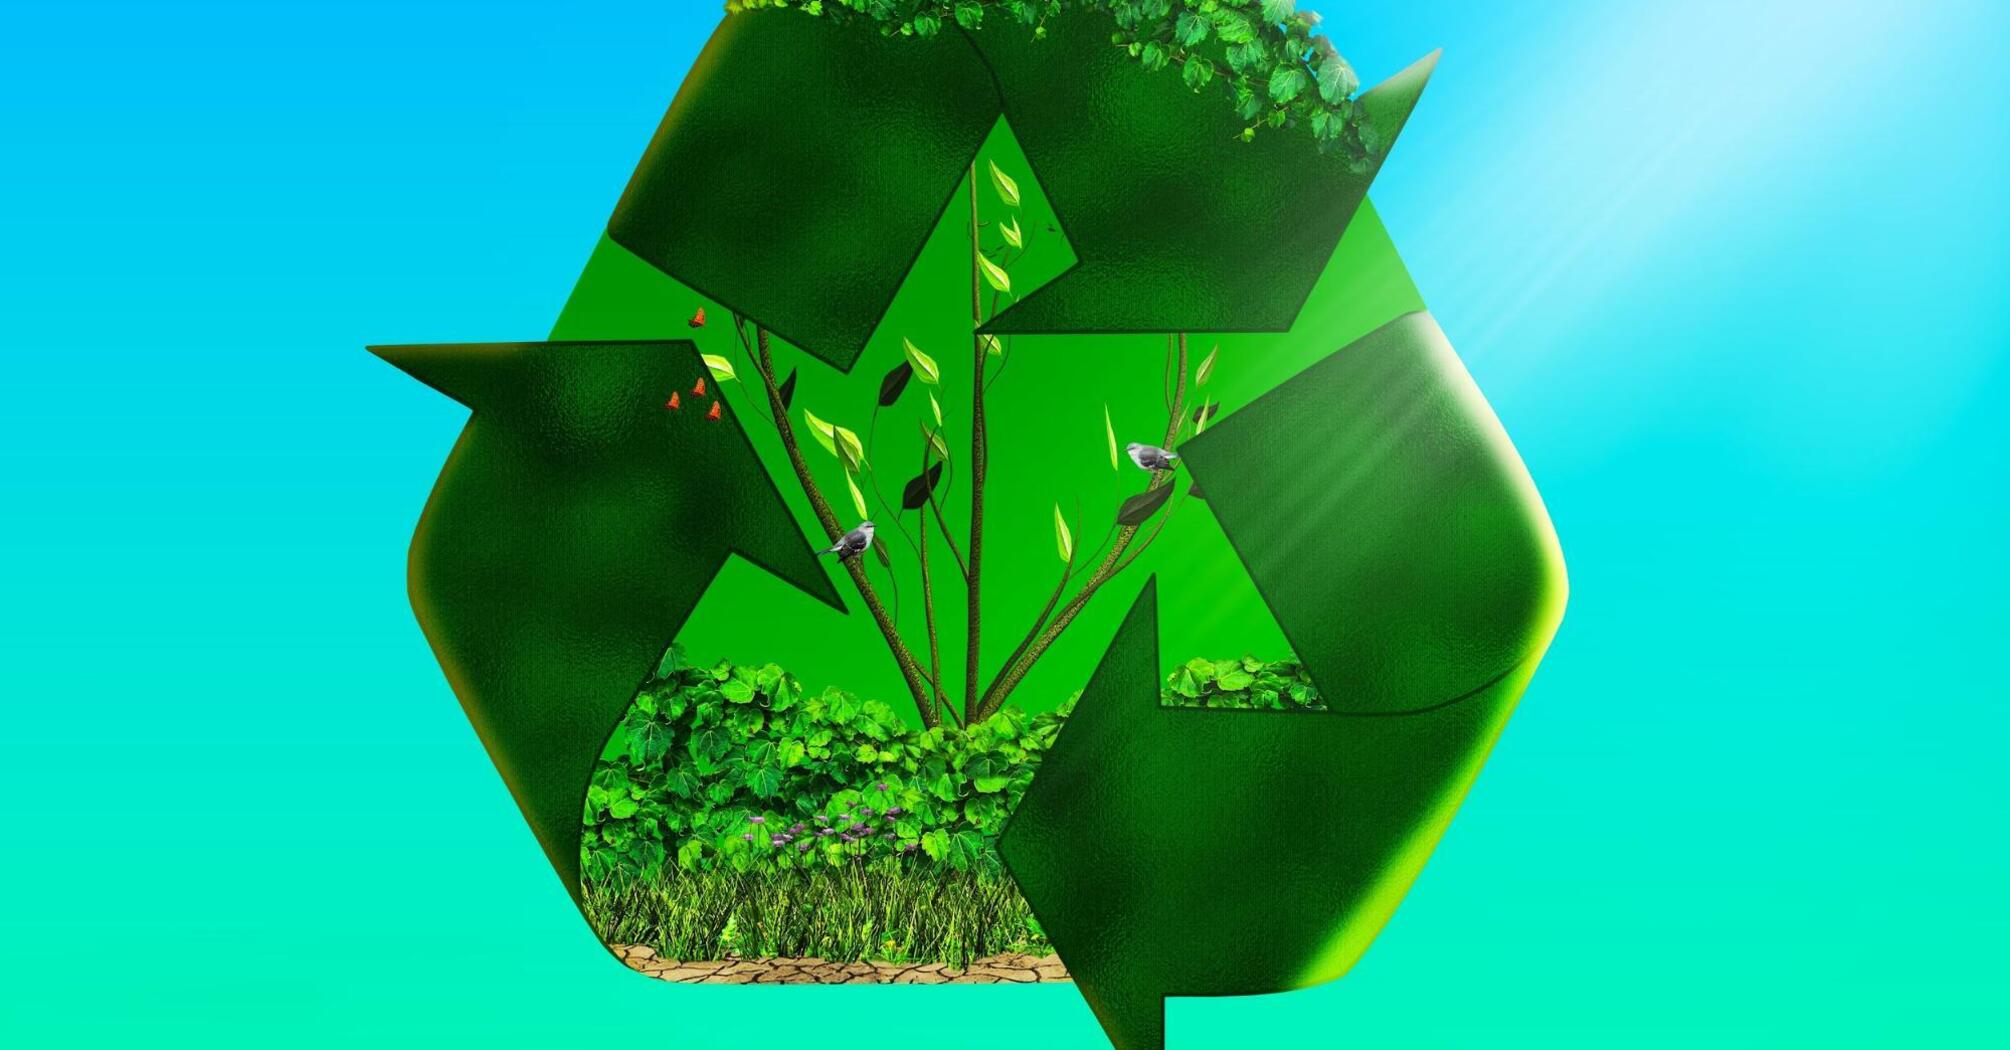 The recycling symbol filled with nature reflects the harmony of ecology and sustainable development